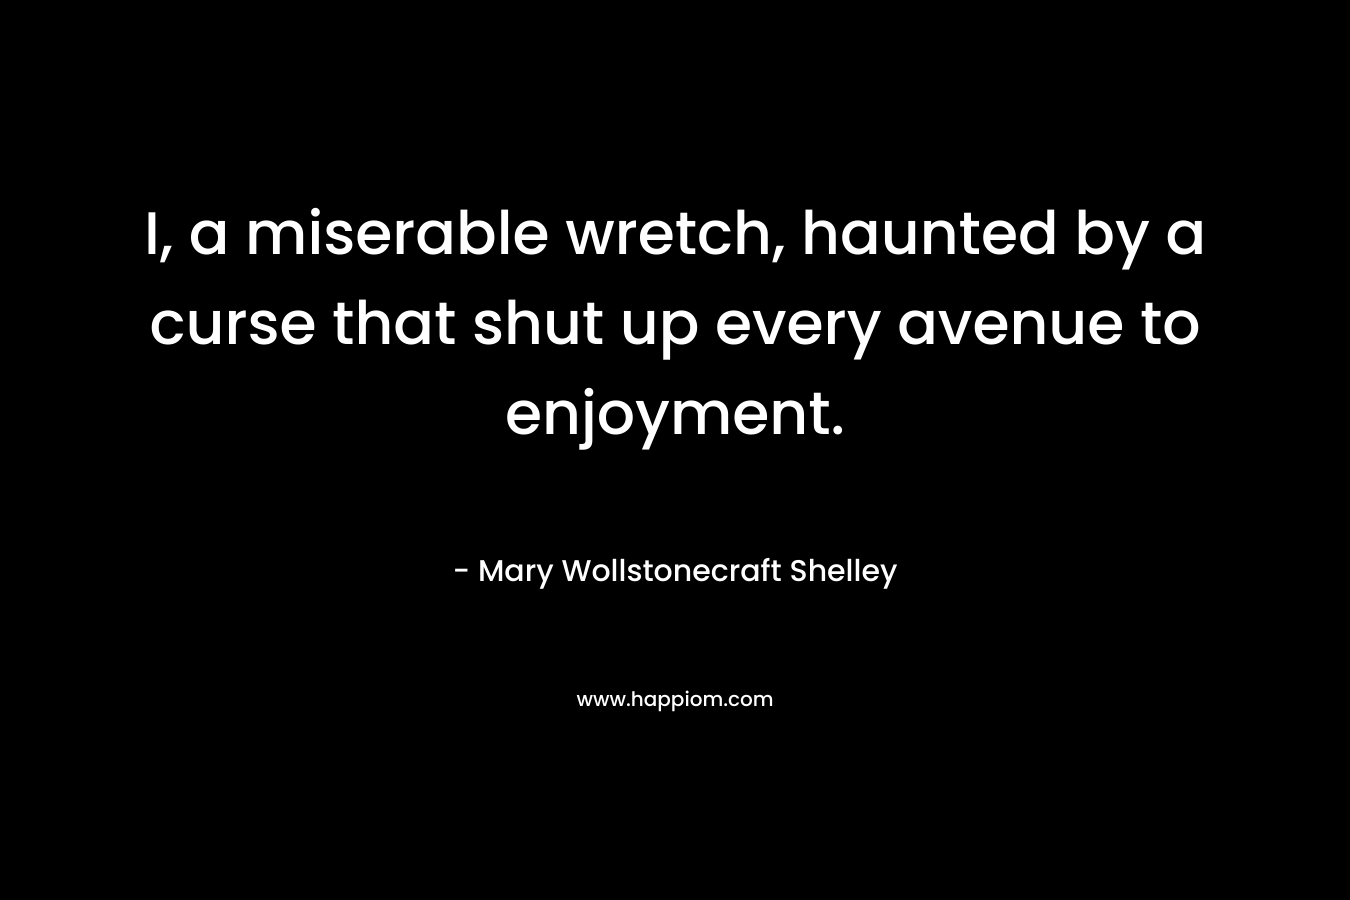 I, a miserable wretch, haunted by a curse that shut up every avenue to enjoyment. – Mary Wollstonecraft Shelley